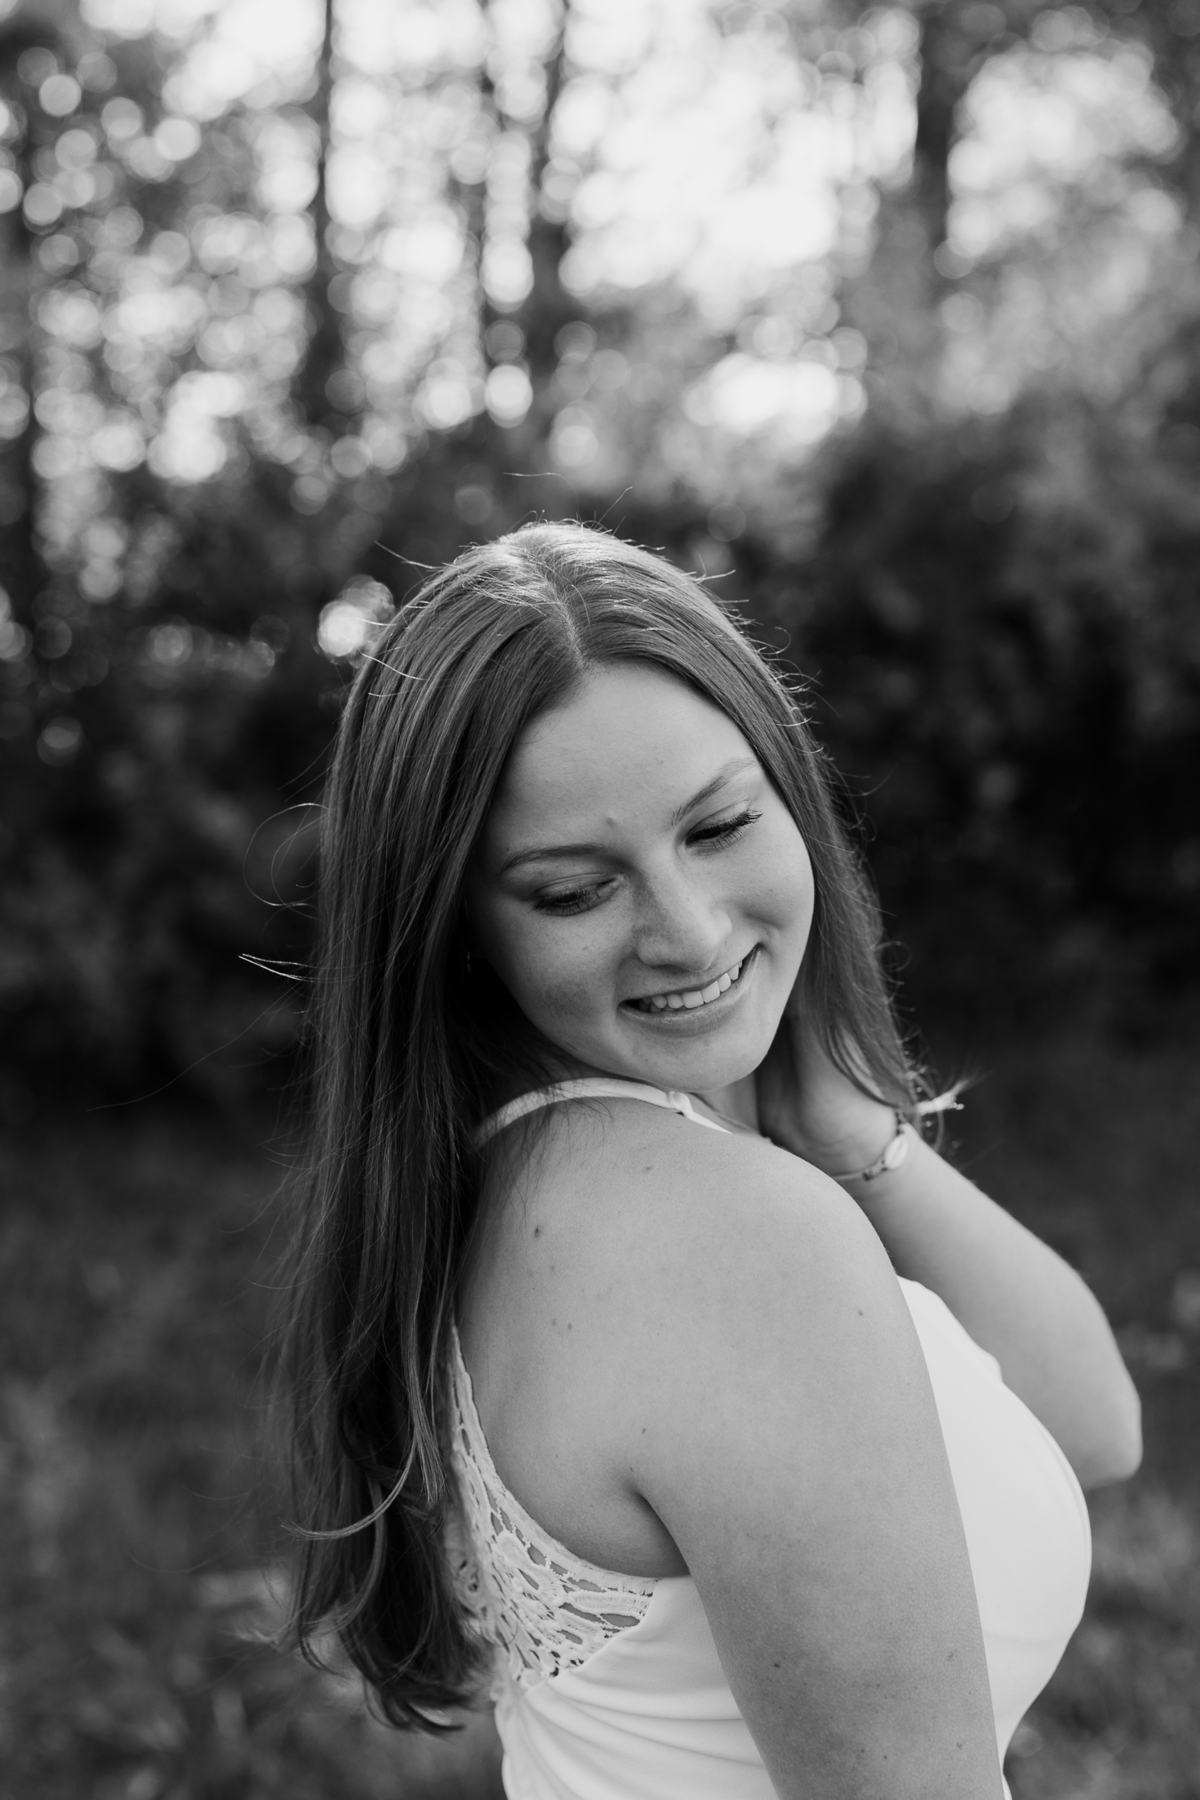 Melton Hill Park Senior Session | Knoxville, TN | Carly Crawford Photography | Knoxville and East Tennessee Wedding, Couples, and Portrait Photographer-252999